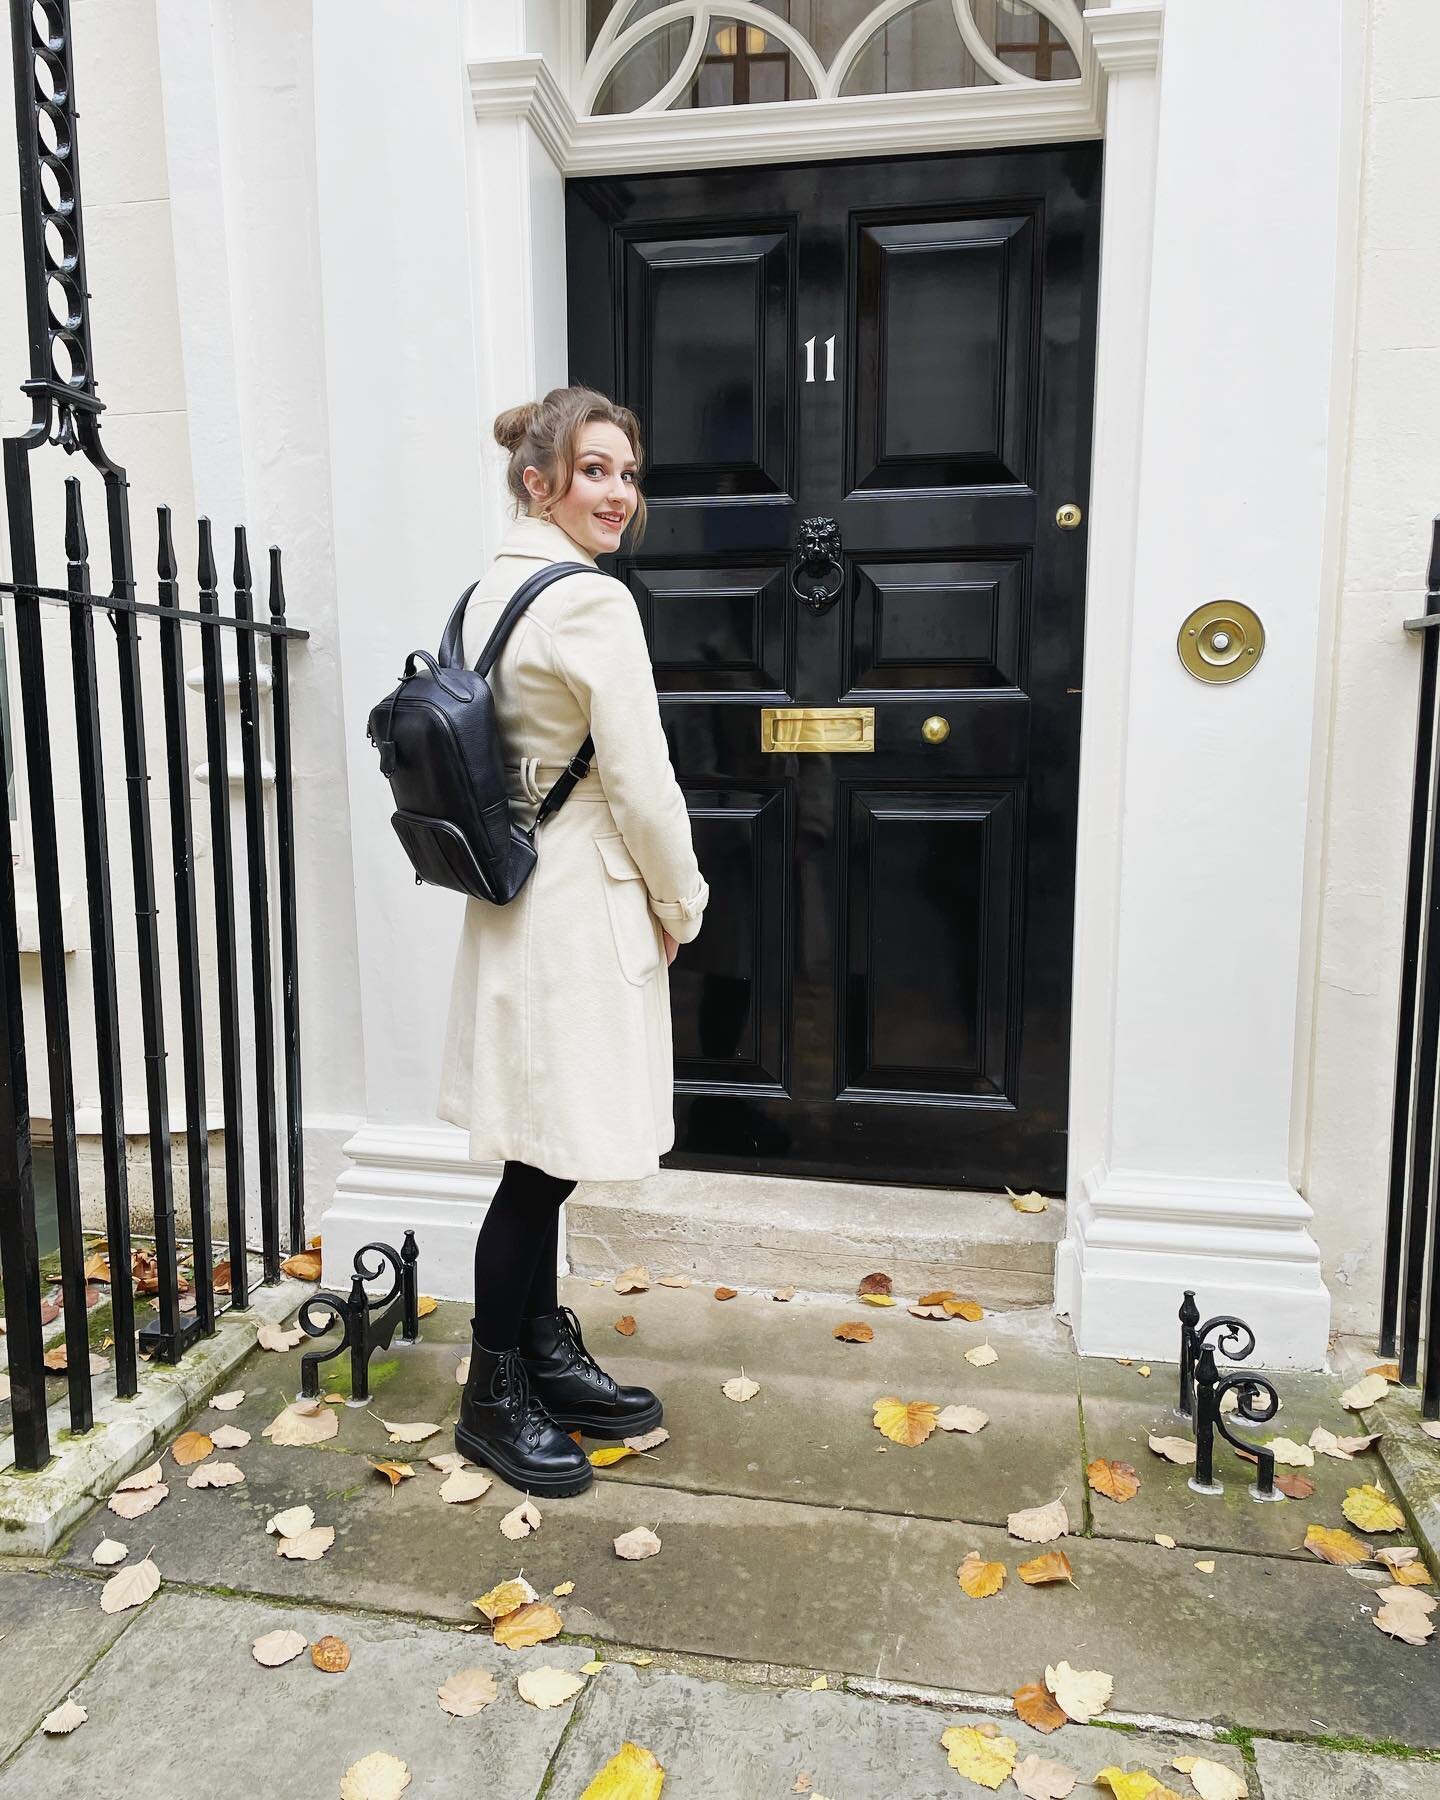 An exciting project in the works! Morning spent rehearsing with @iainclarkepiano at Downing Street. 
#downingstreet #london #soprano #operasinger #operasingersofinstagram #musicianlife #classical #classicalsinger #music